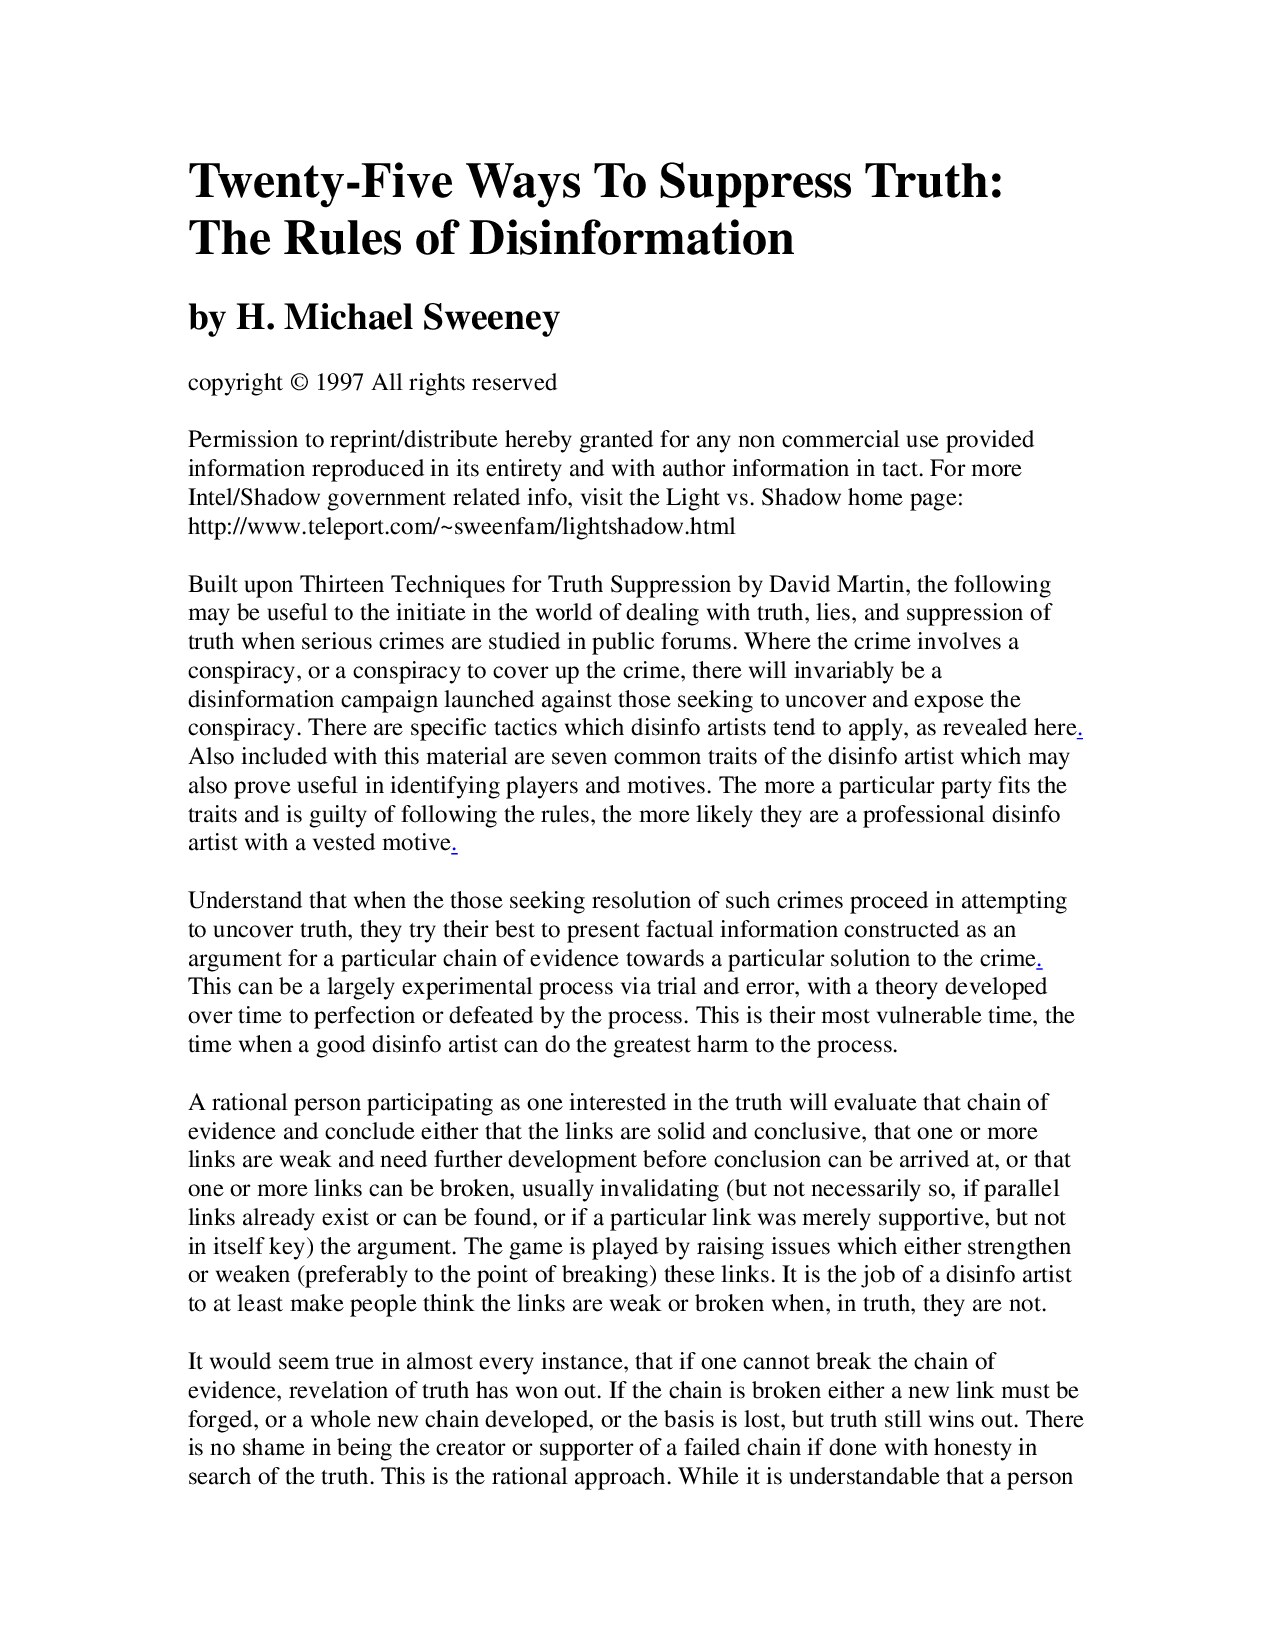 Twenty-Five Ways To Suppress Truth: The Rules of Disinformation